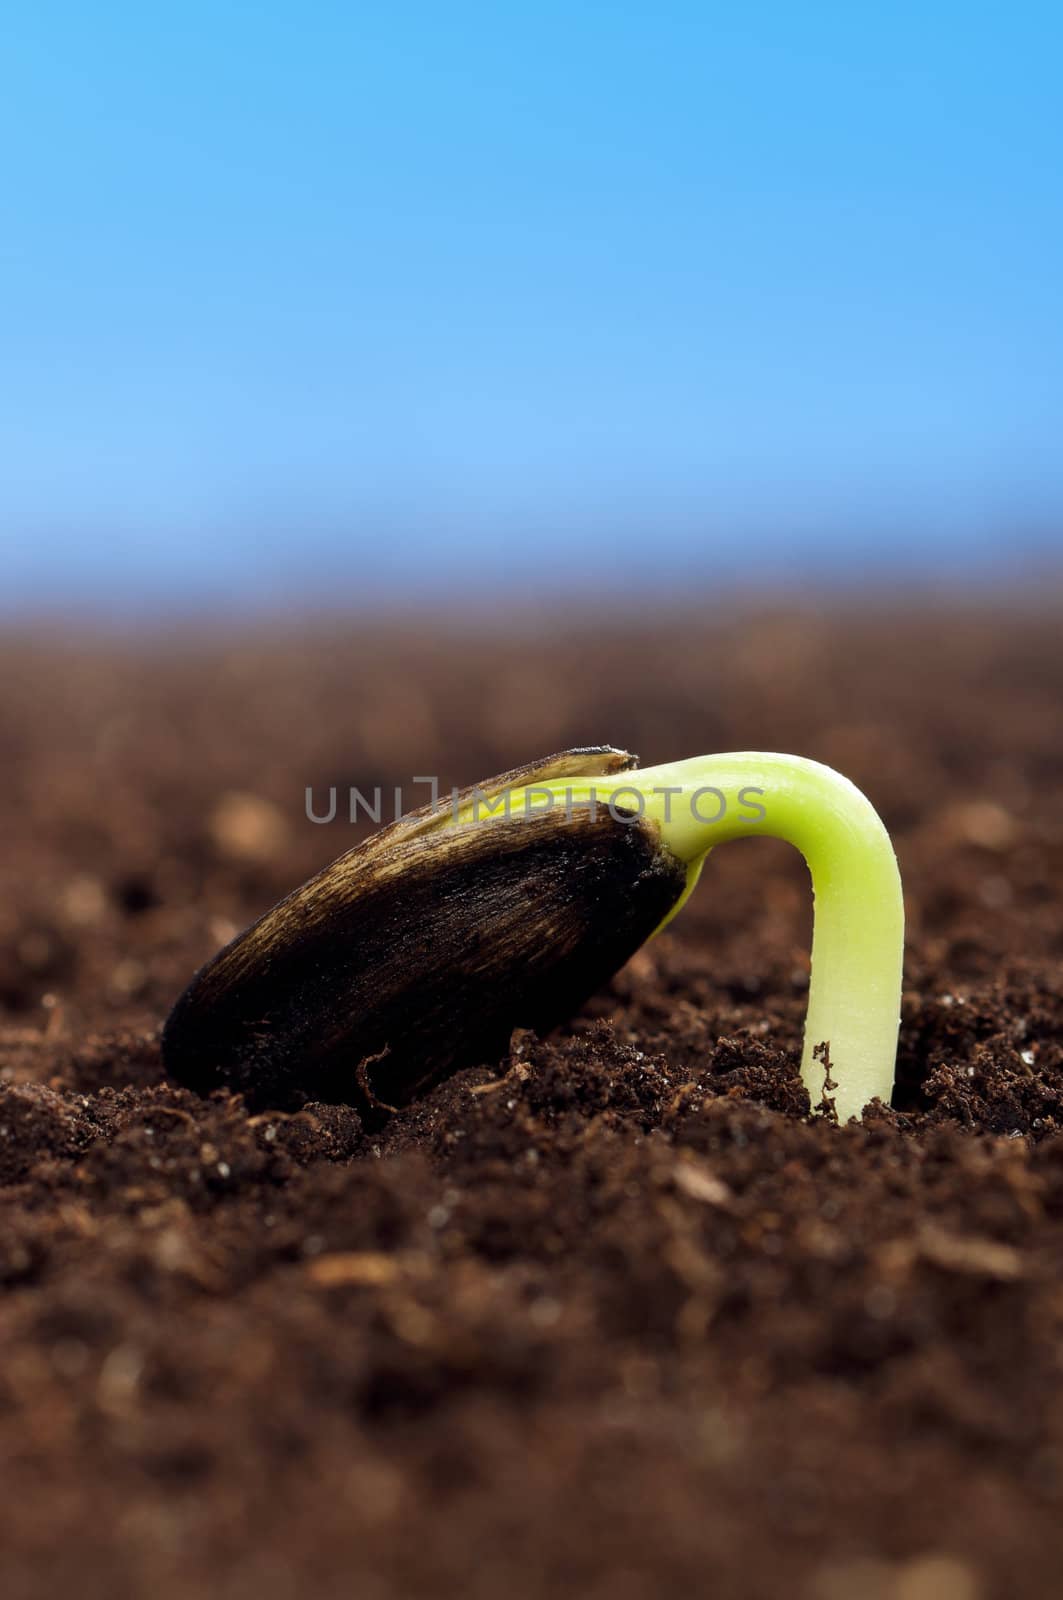 Close-up of seedling of a sunflower growing out of soil